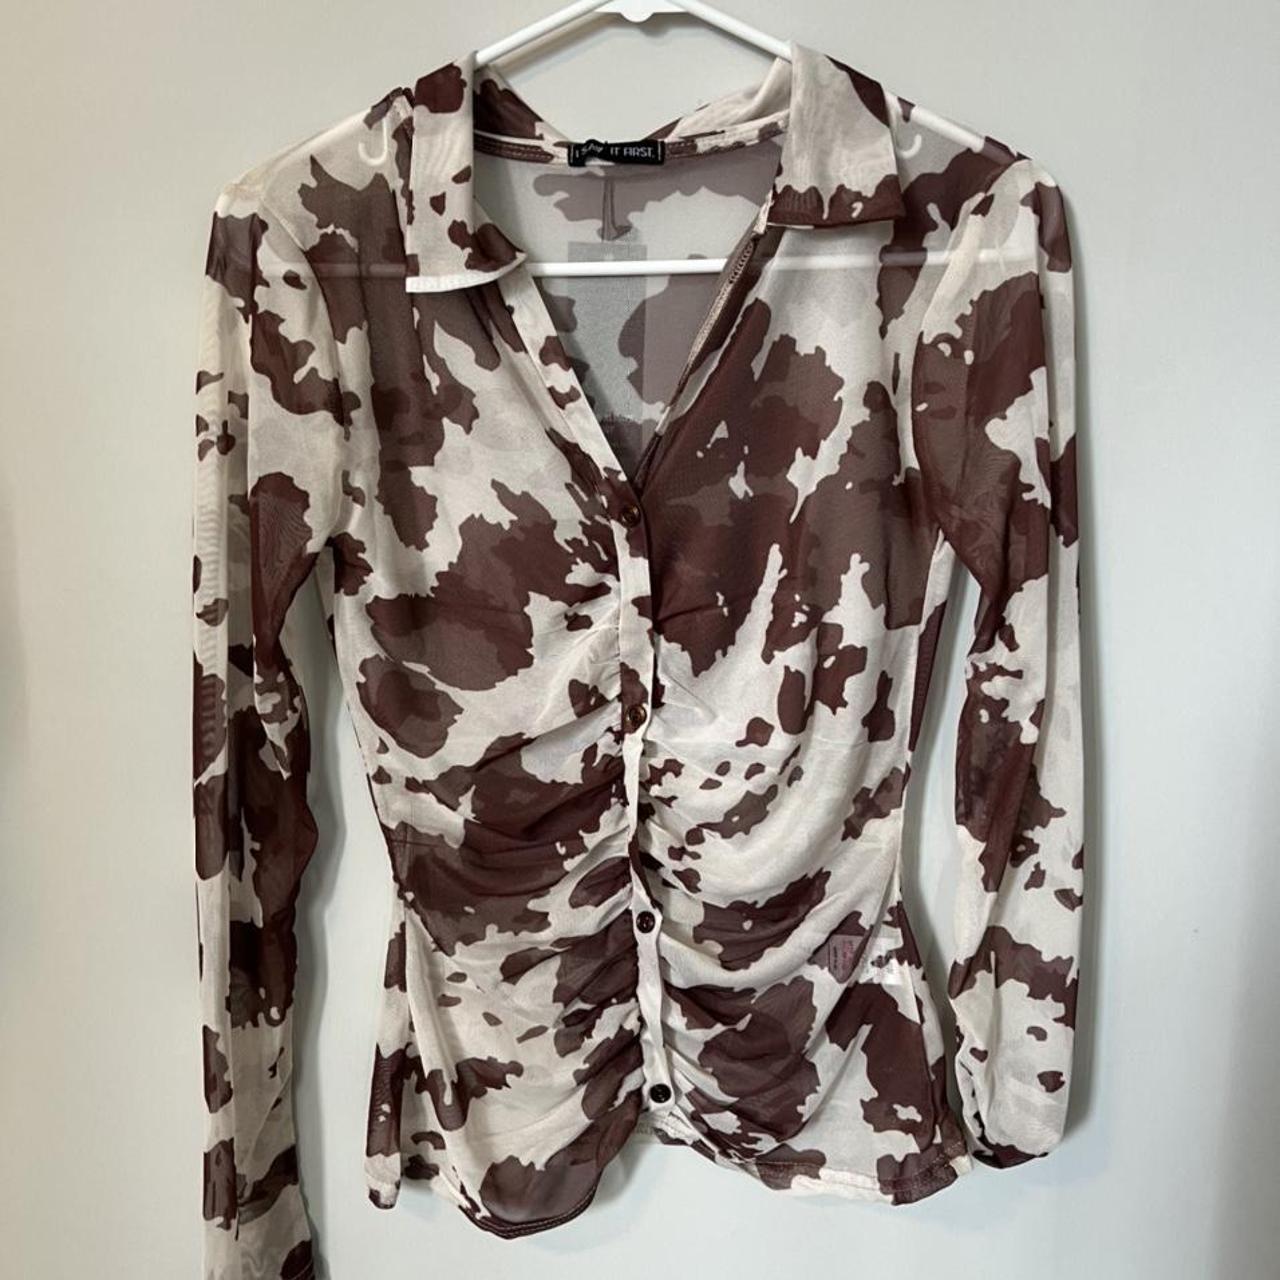 I Saw It First Women's Brown and Cream Shirt